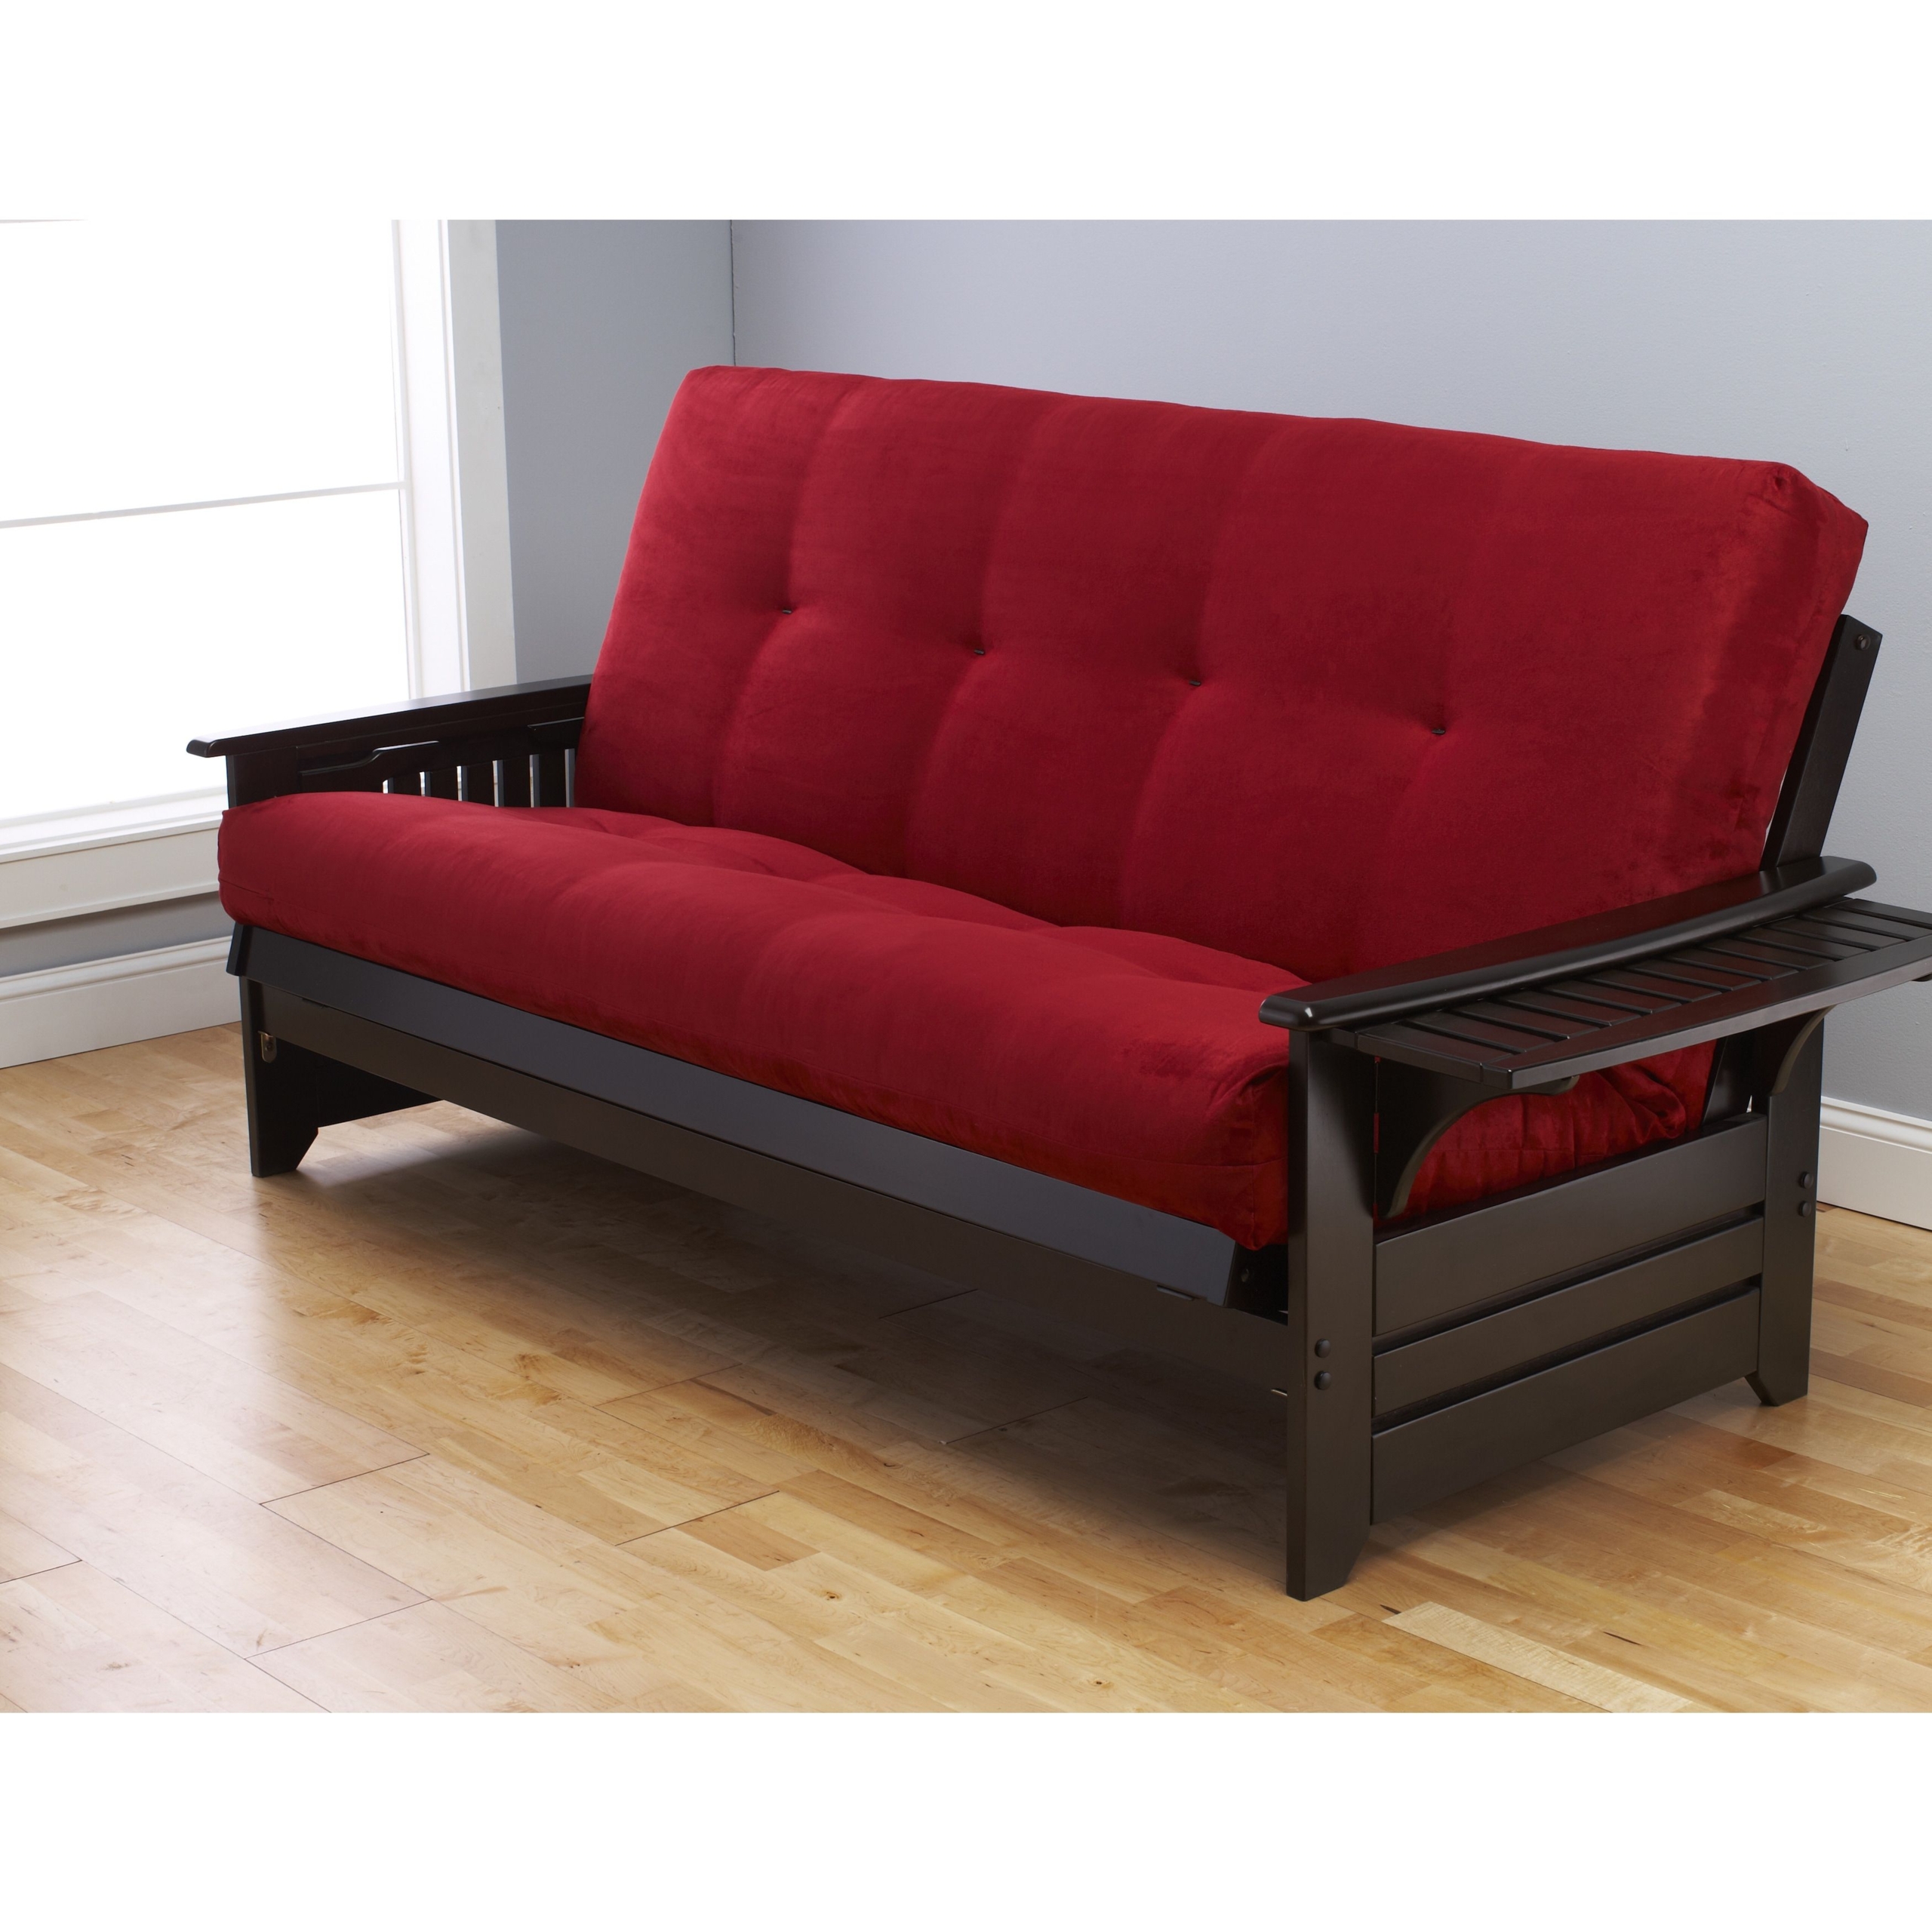 Phoenix Queen Size Futon Sofa Bed With Hardwood Frame And Suede Innerspring Mattress